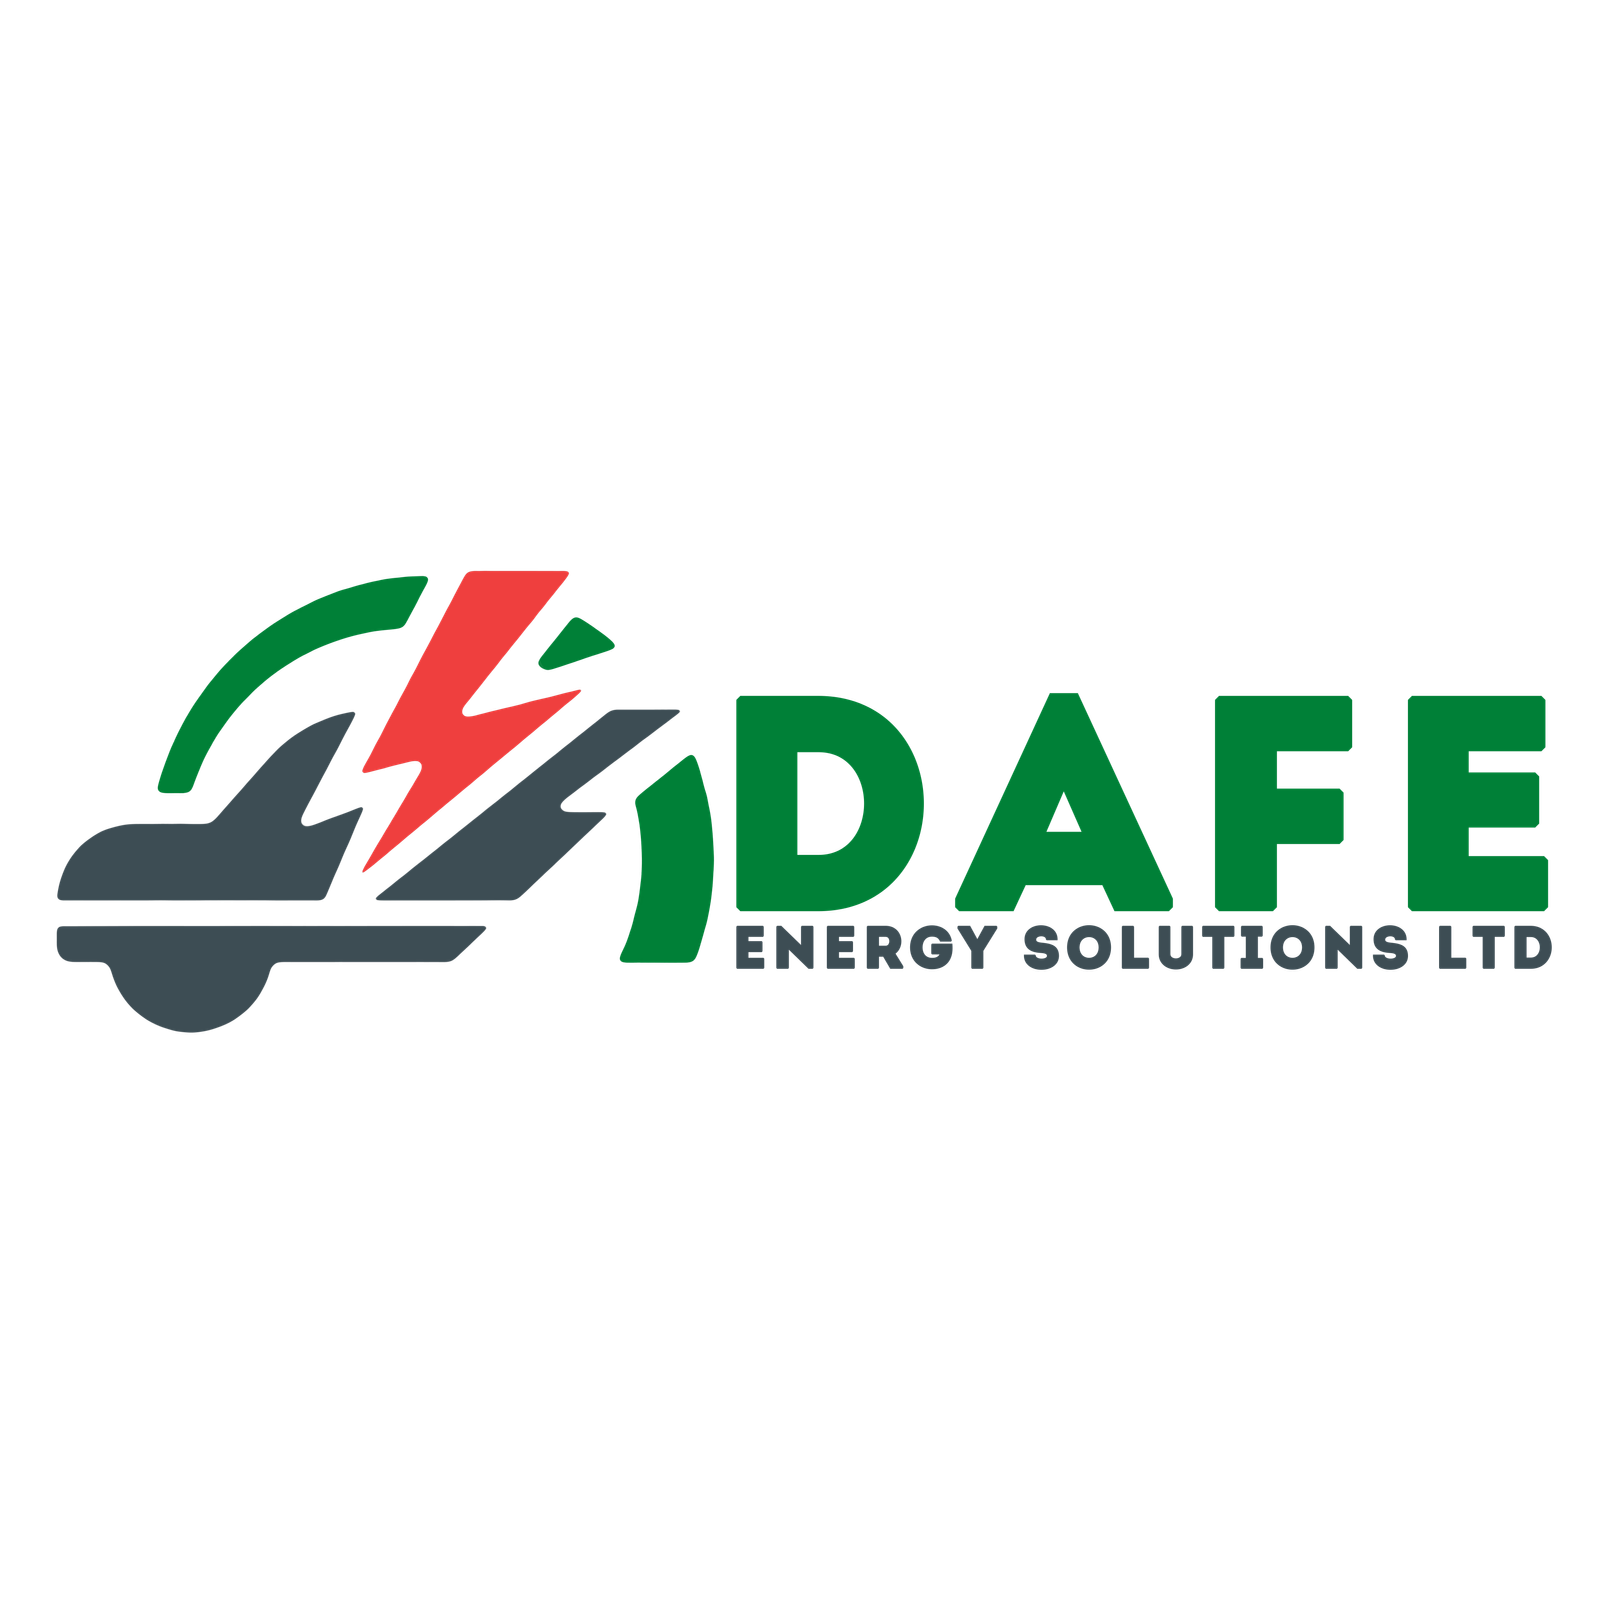 Dafe Energy Solutions Limited